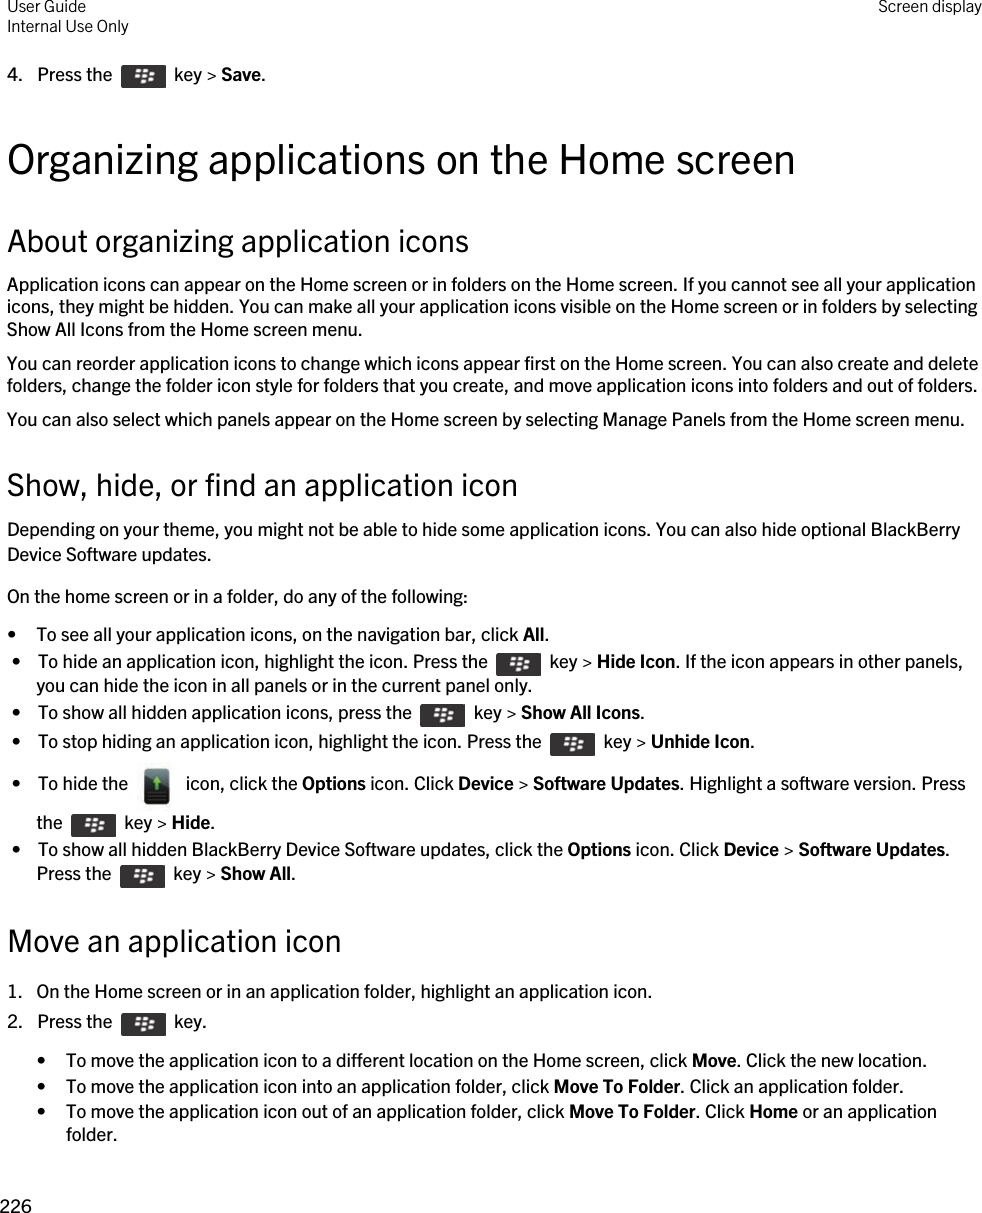 4.  Press the    key &gt; Save. Organizing applications on the Home screenAbout organizing application iconsApplication icons can appear on the Home screen or in folders on the Home screen. If you cannot see all your application icons, they might be hidden. You can make all your application icons visible on the Home screen or in folders by selecting Show All Icons from the Home screen menu.You can reorder application icons to change which icons appear first on the Home screen. You can also create and delete folders, change the folder icon style for folders that you create, and move application icons into folders and out of folders.You can also select which panels appear on the Home screen by selecting Manage Panels from the Home screen menu.Show, hide, or find an application iconDepending on your theme, you might not be able to hide some application icons. You can also hide optional BlackBerry Device Software updates.On the home screen or in a folder, do any of the following:• To see all your application icons, on the navigation bar, click All. •  To hide an application icon, highlight the icon. Press the    key &gt; Hide Icon. If the icon appears in other panels, you can hide the icon in all panels or in the current panel only. •  To show all hidden application icons, press the    key &gt; Show All Icons. •  To stop hiding an application icon, highlight the icon. Press the    key &gt; Unhide Icon. •  To hide the    icon, click the Options icon. Click Device &gt; Software Updates. Highlight a software version. Press the    key &gt; Hide. •  To show all hidden BlackBerry Device Software updates, click the Options icon. Click Device &gt; Software Updates. Press the    key &gt; Show All.Move an application icon1. On the Home screen or in an application folder, highlight an application icon.2.  Press the    key. • To move the application icon to a different location on the Home screen, click Move. Click the new location.• To move the application icon into an application folder, click Move To Folder. Click an application folder.• To move the application icon out of an application folder, click Move To Folder. Click Home or an application folder.User GuideInternal Use Only Screen display226 